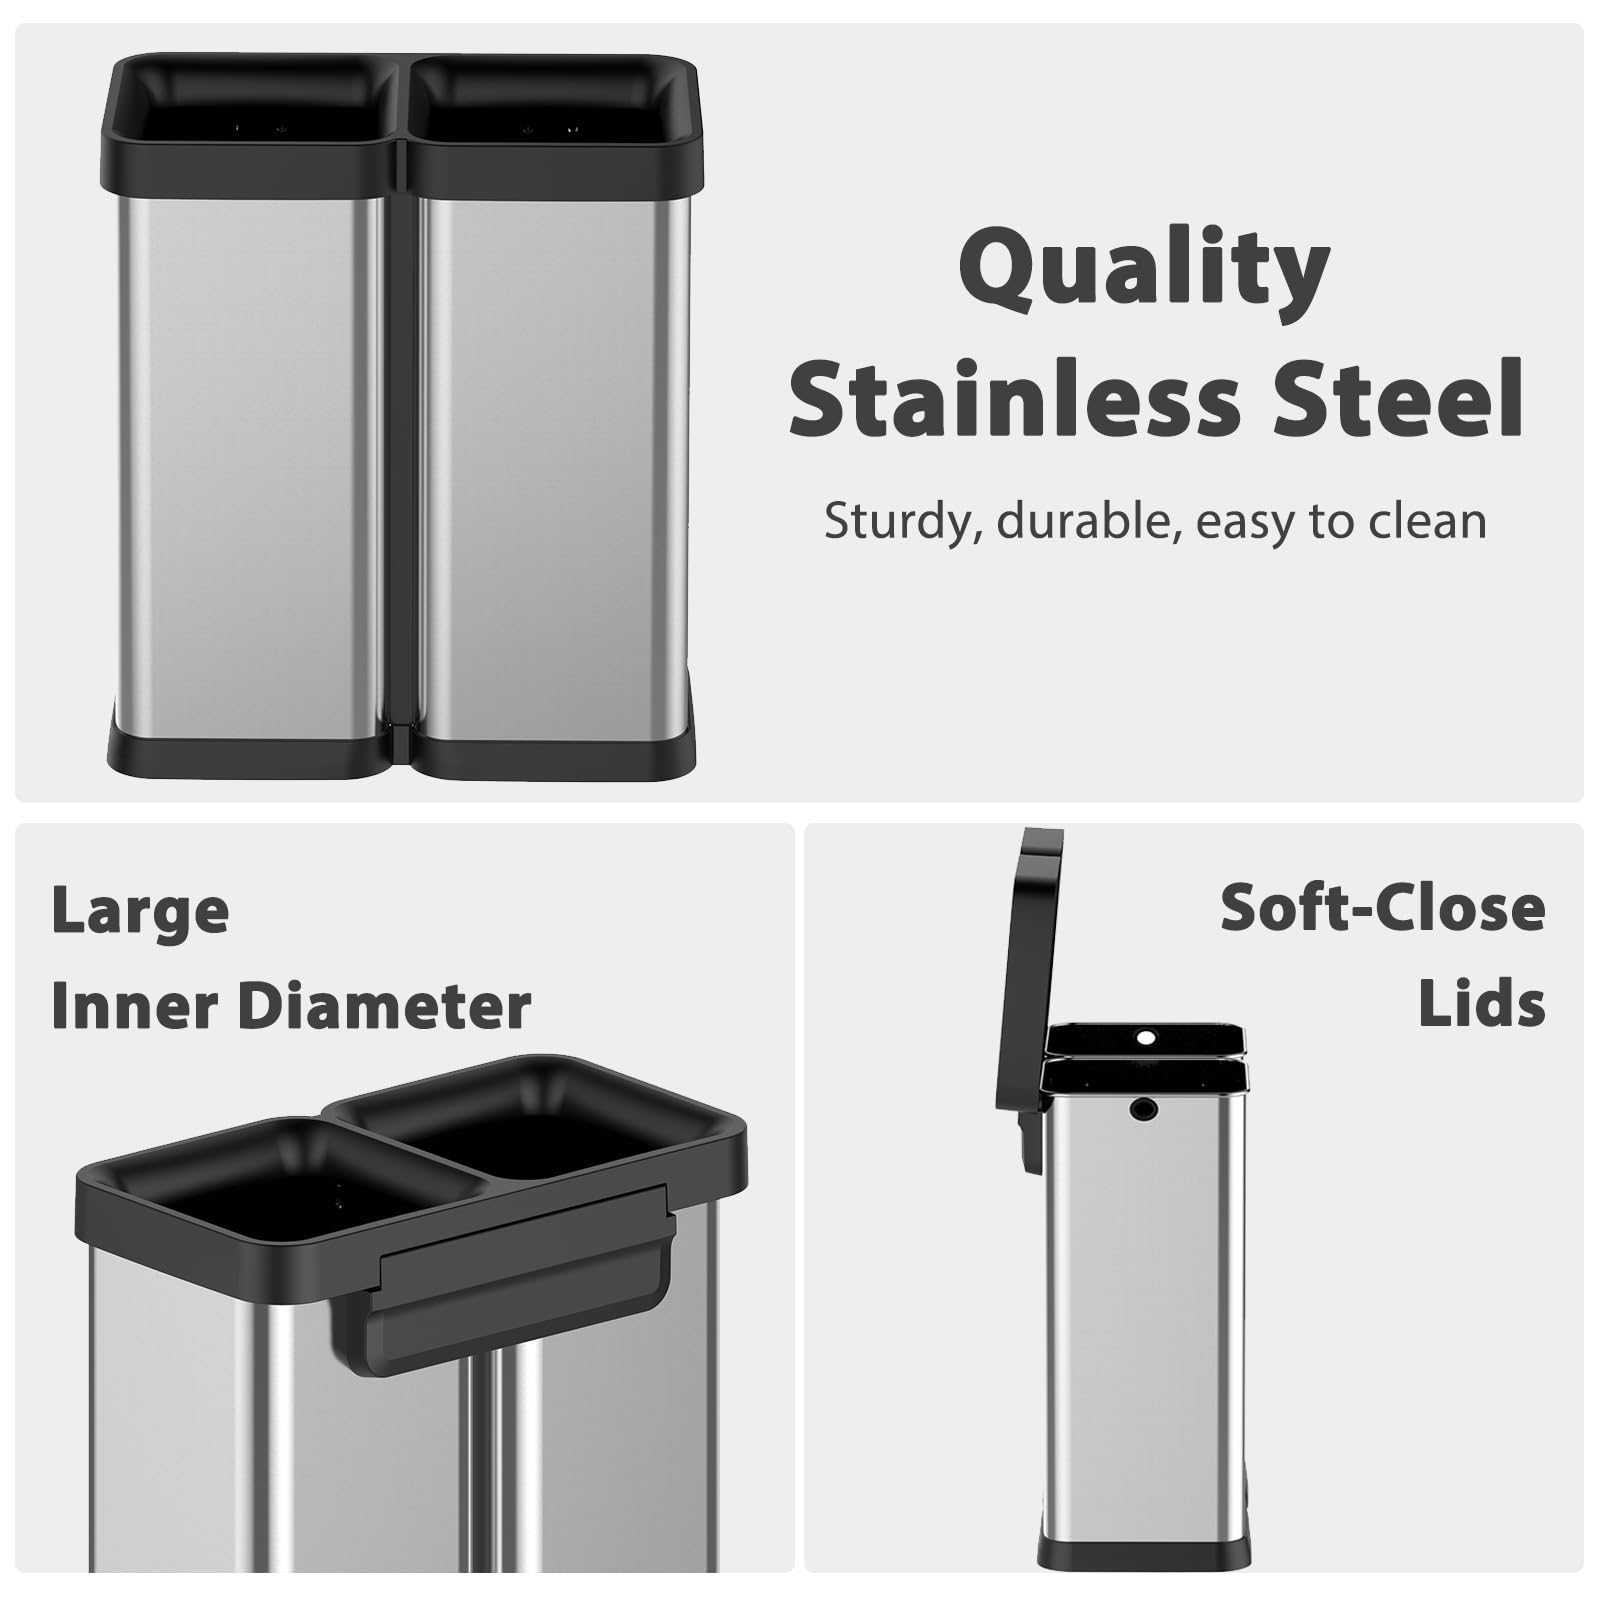 2x7.9 Gallon Kitchen Trash Can, Dual Compartment Waste Bins, Open Top, No Lid Stainless Steel Trash Bin for Kitchen, Office, Restaurant